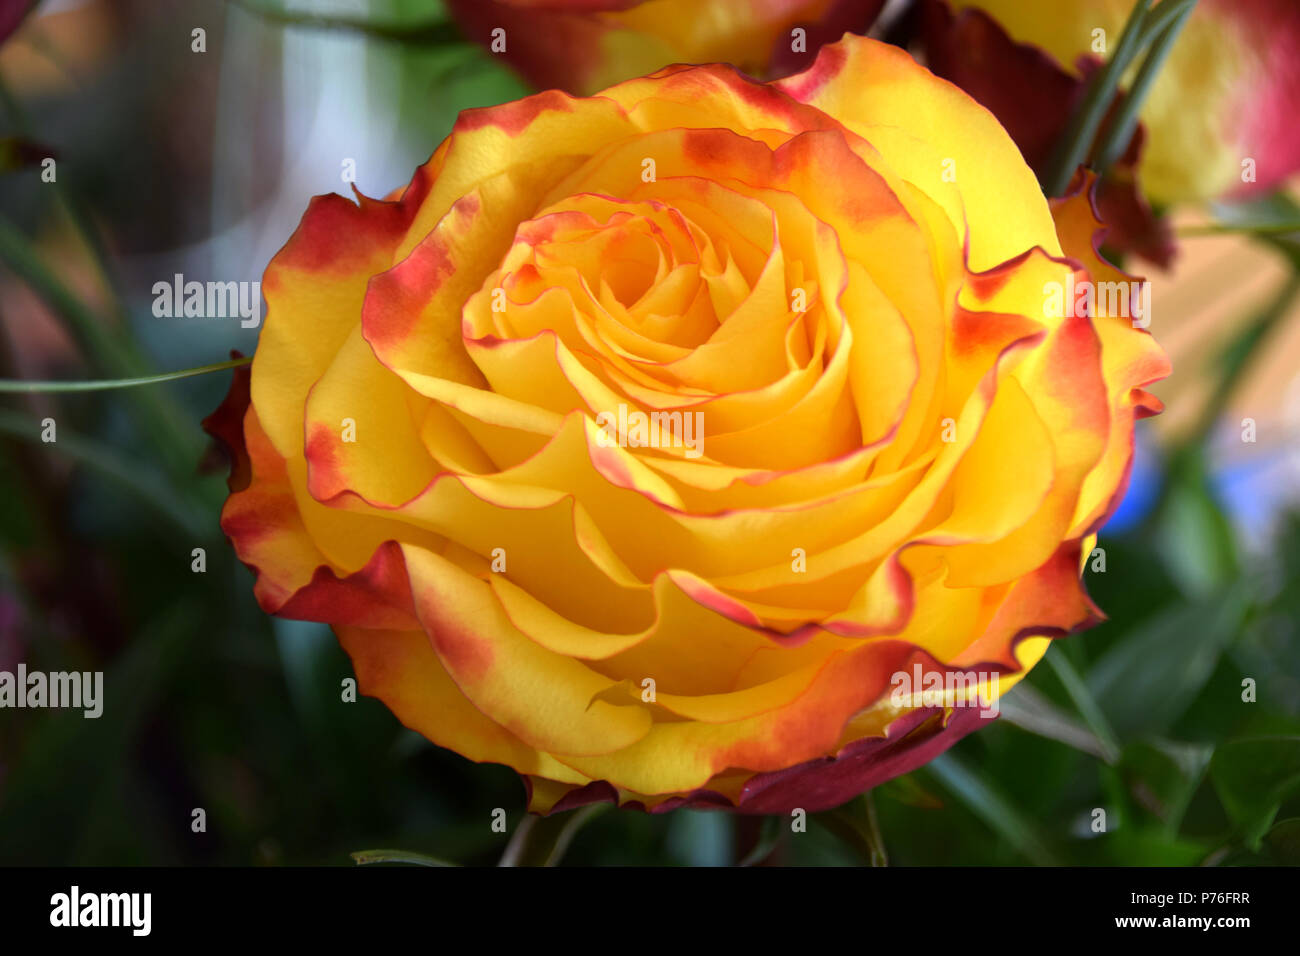 perfect rose as a symbol for everlasting love, yellow rose with a red border on petals Stock Photo